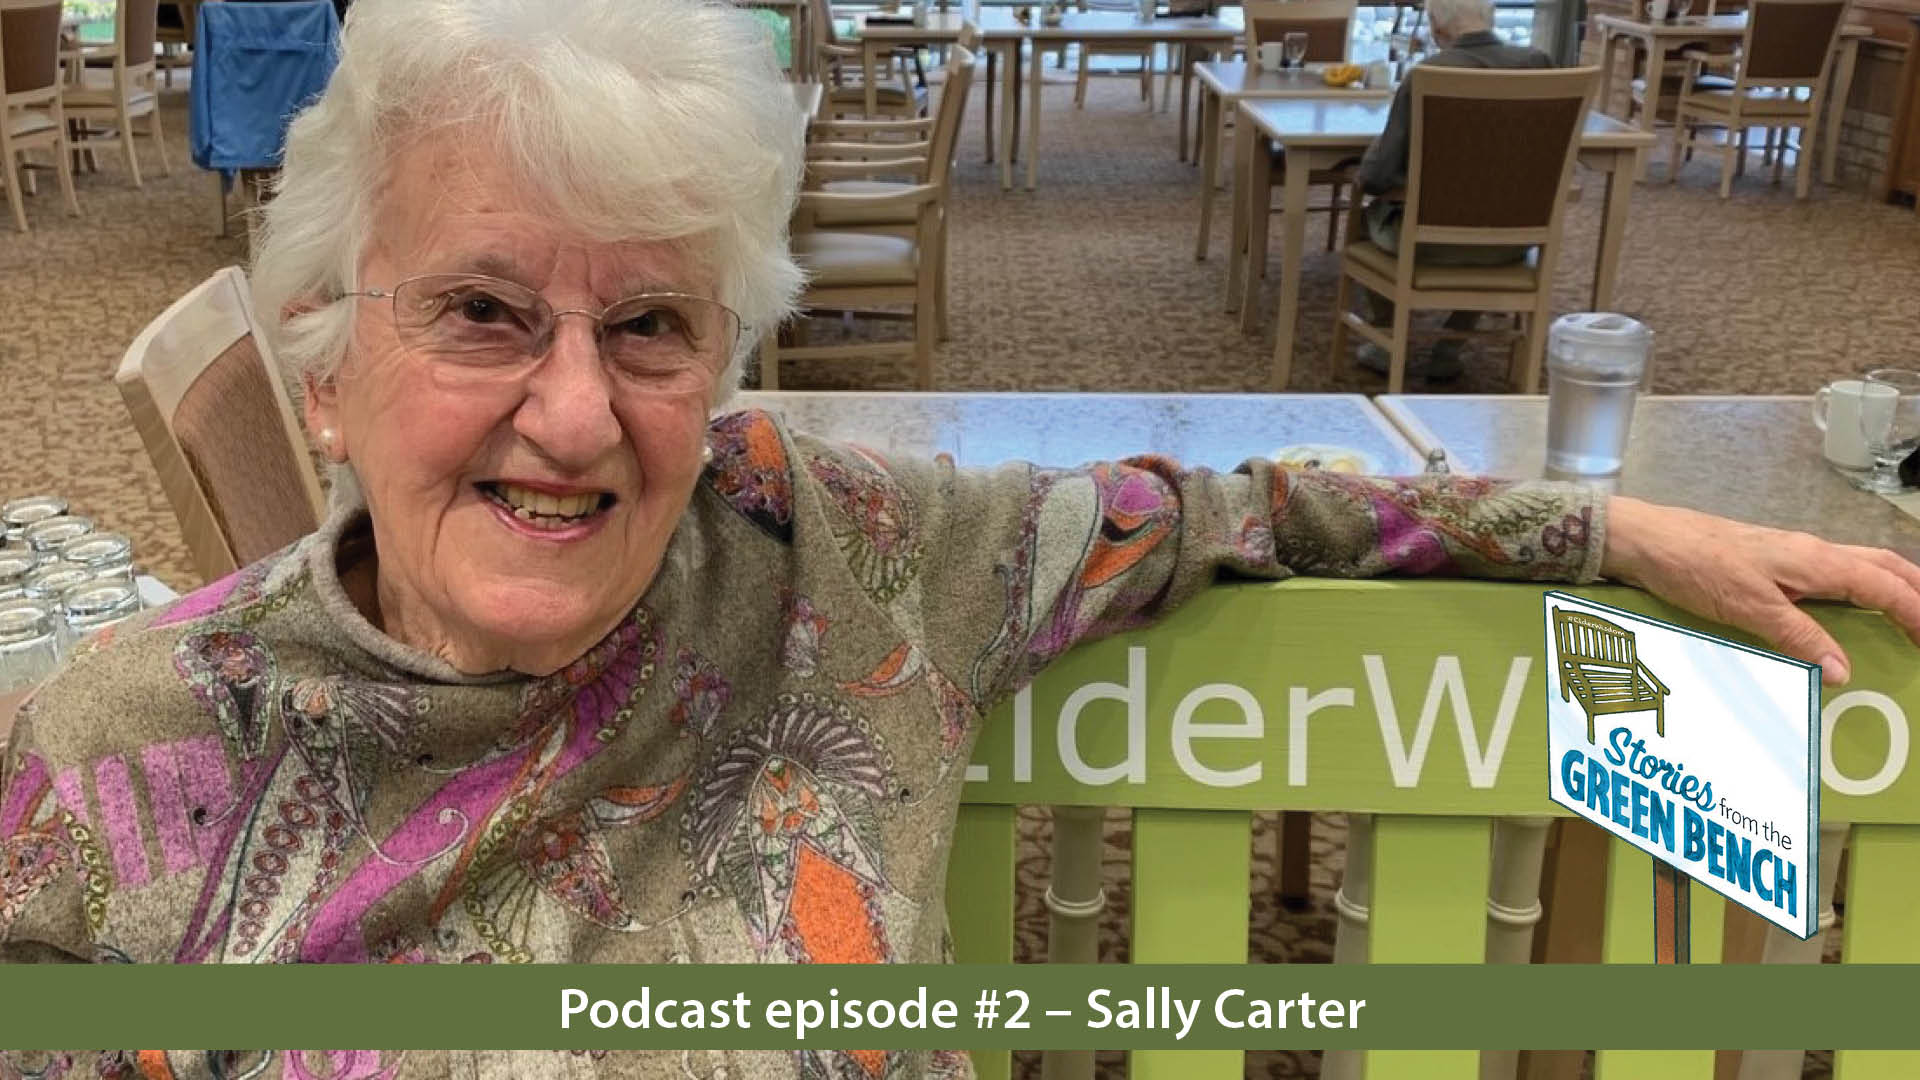 Sally Carter sits on the Green Bench - Podcast Episode #2